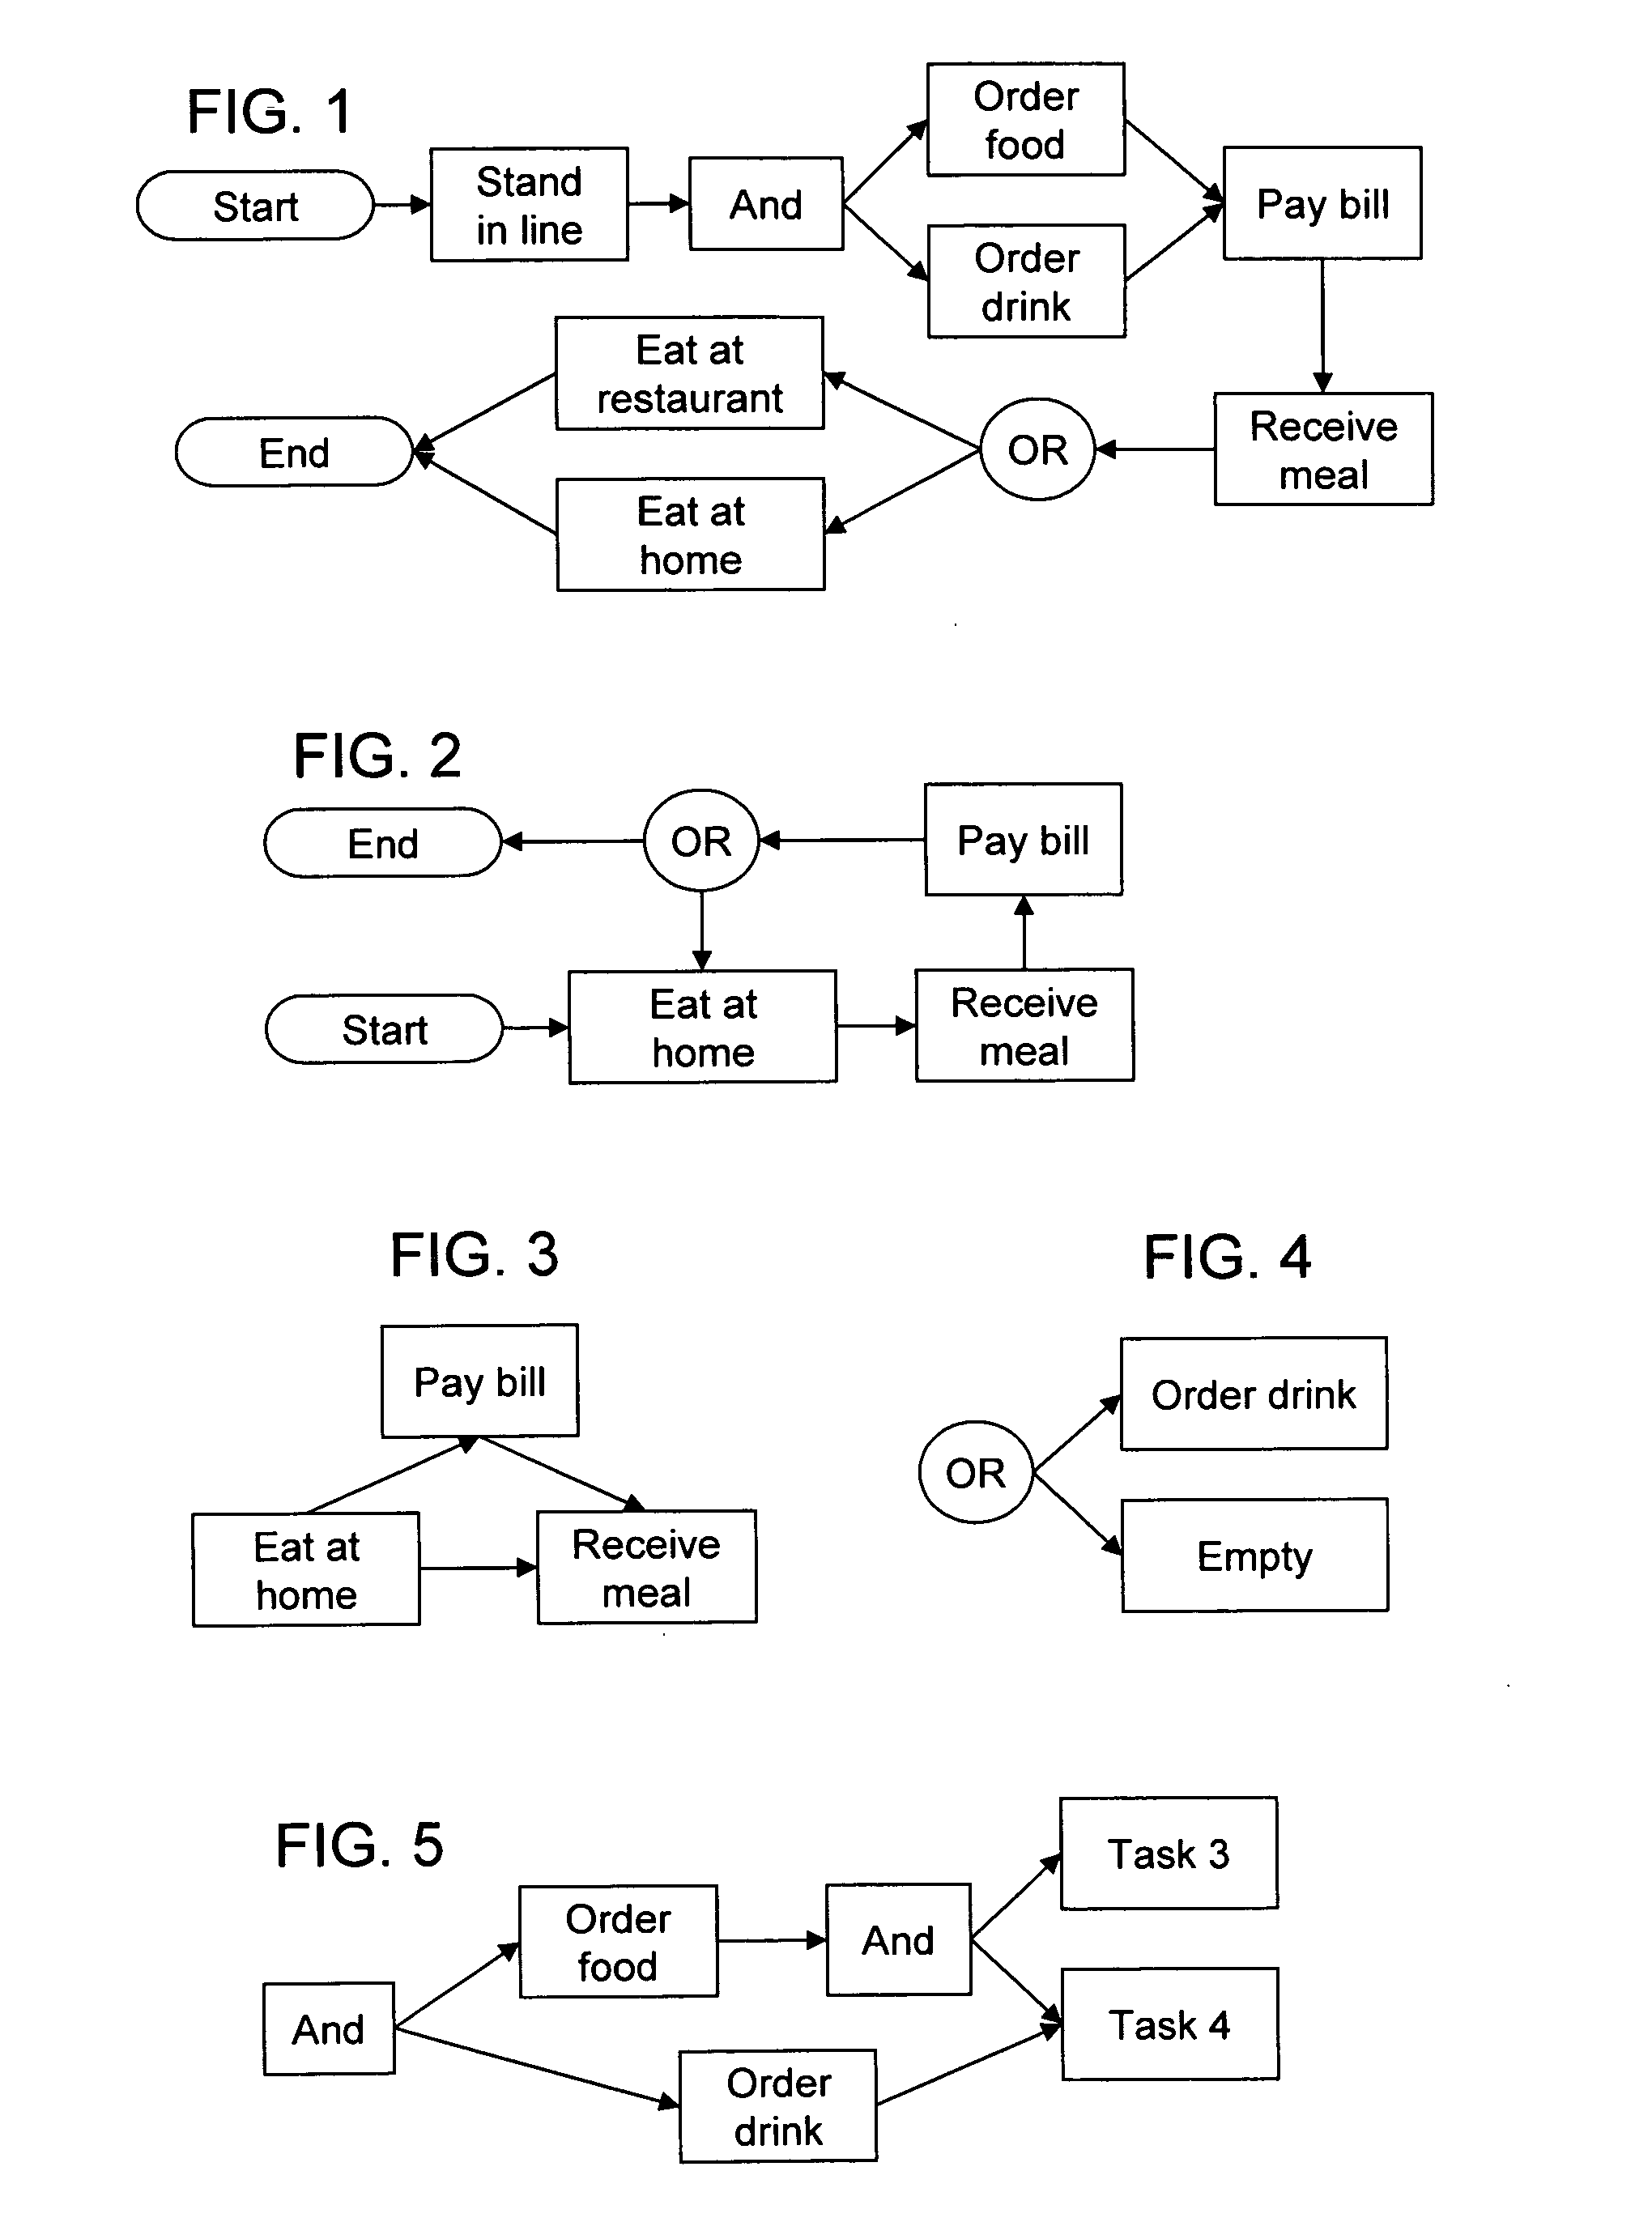 Methods and apparatus for identifying workflow graphs using an iterative analysis of empirical data